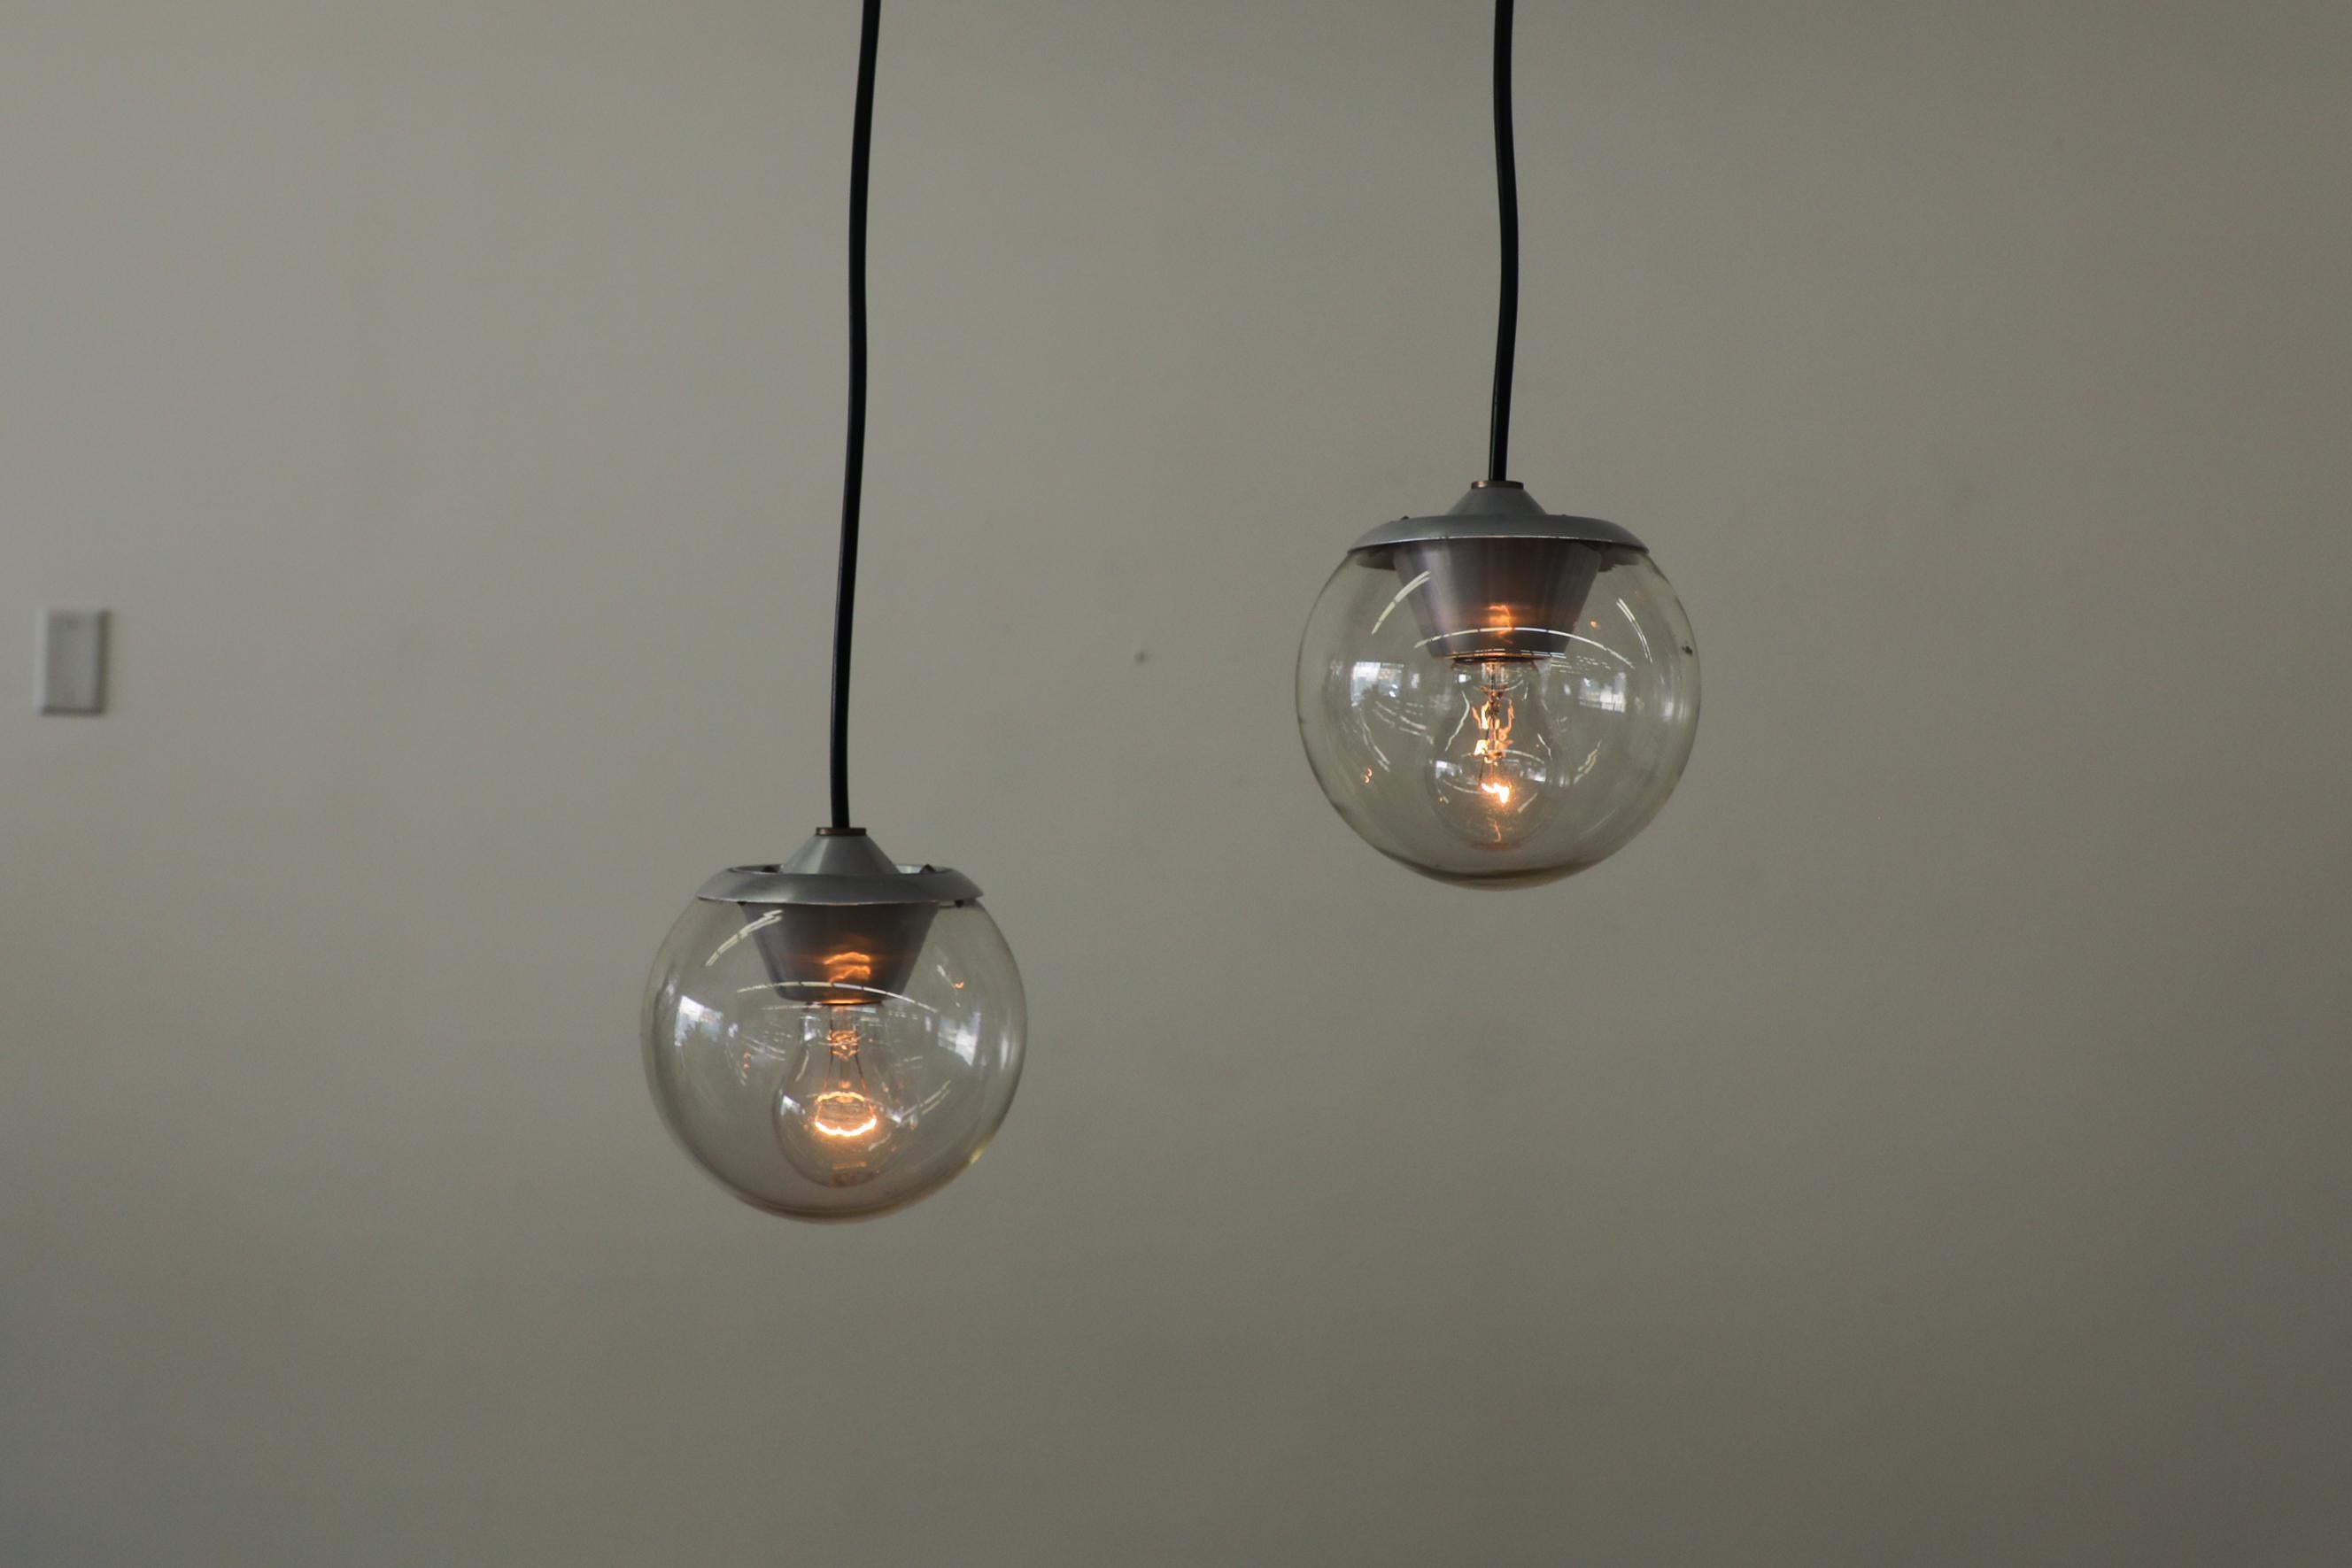 Pair of Gino Sarfatti Glass Pendant Lights Model 2095/1 by Arteluce, Italy, 1958 In Good Condition For Sale In Los Angeles, CA